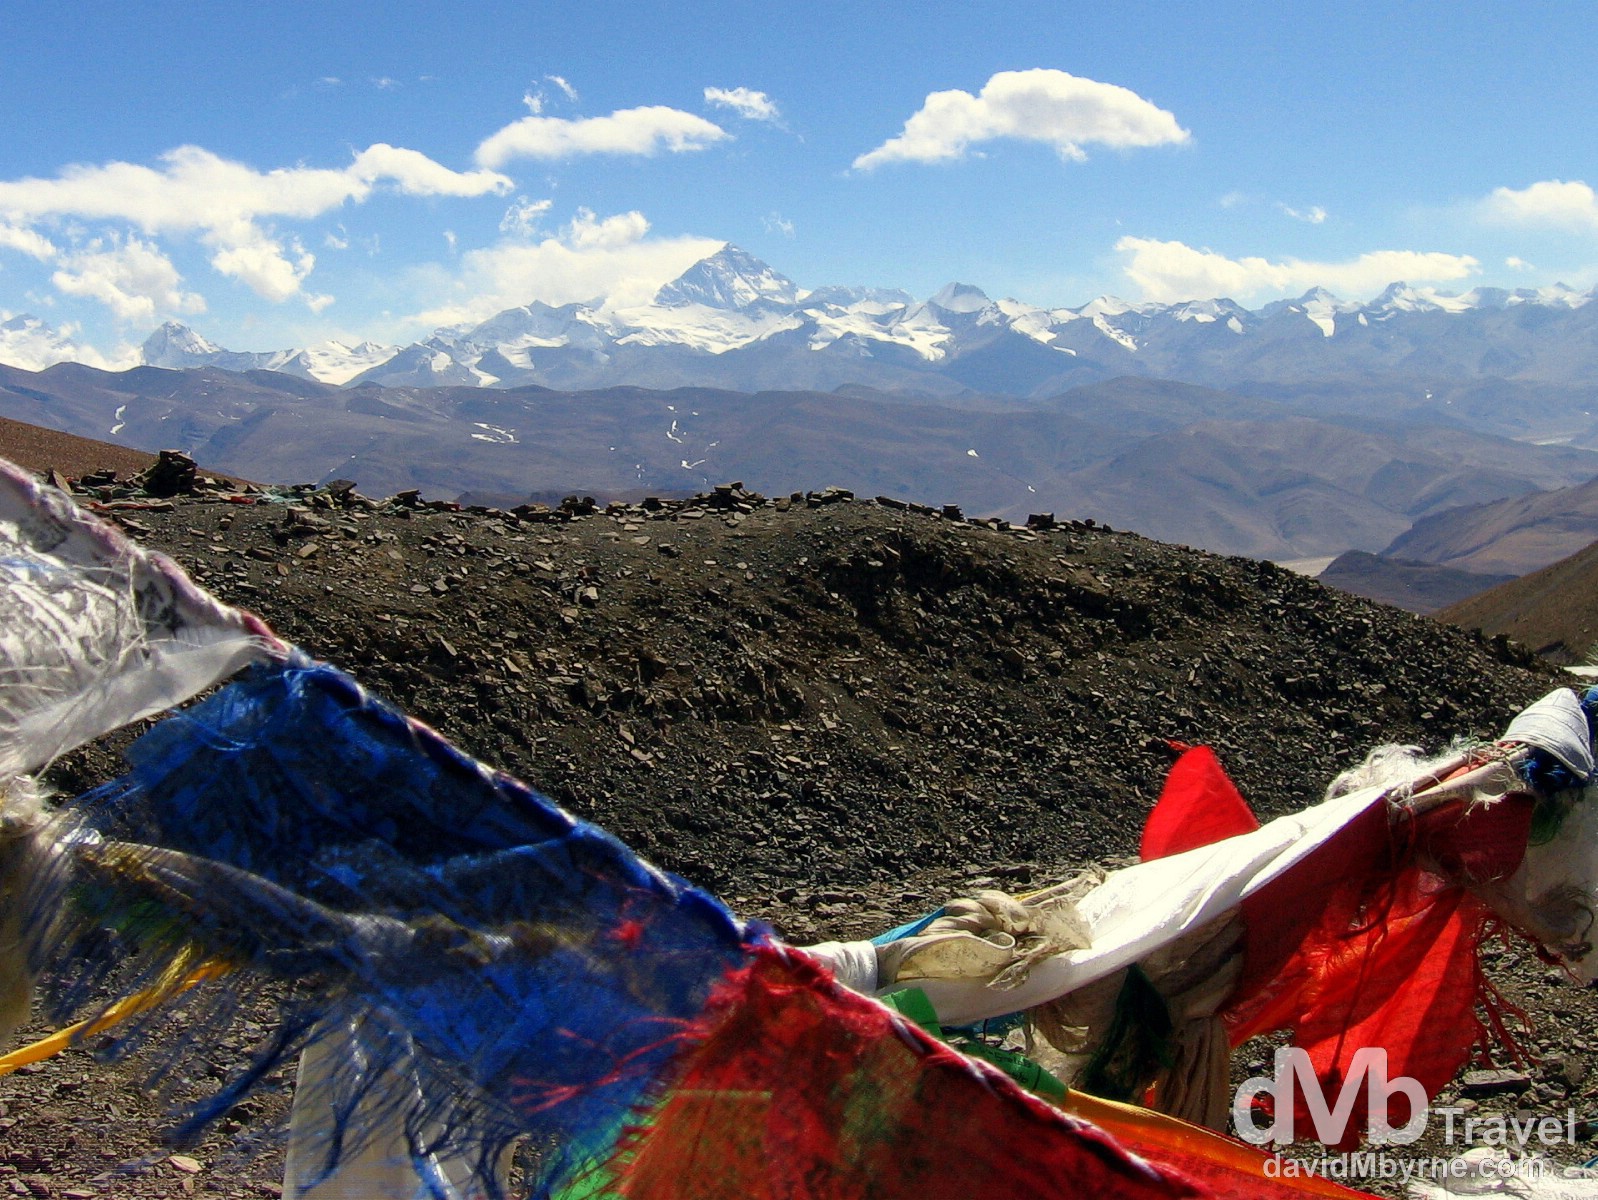 The Everest region from the Pang La pass in Tibet